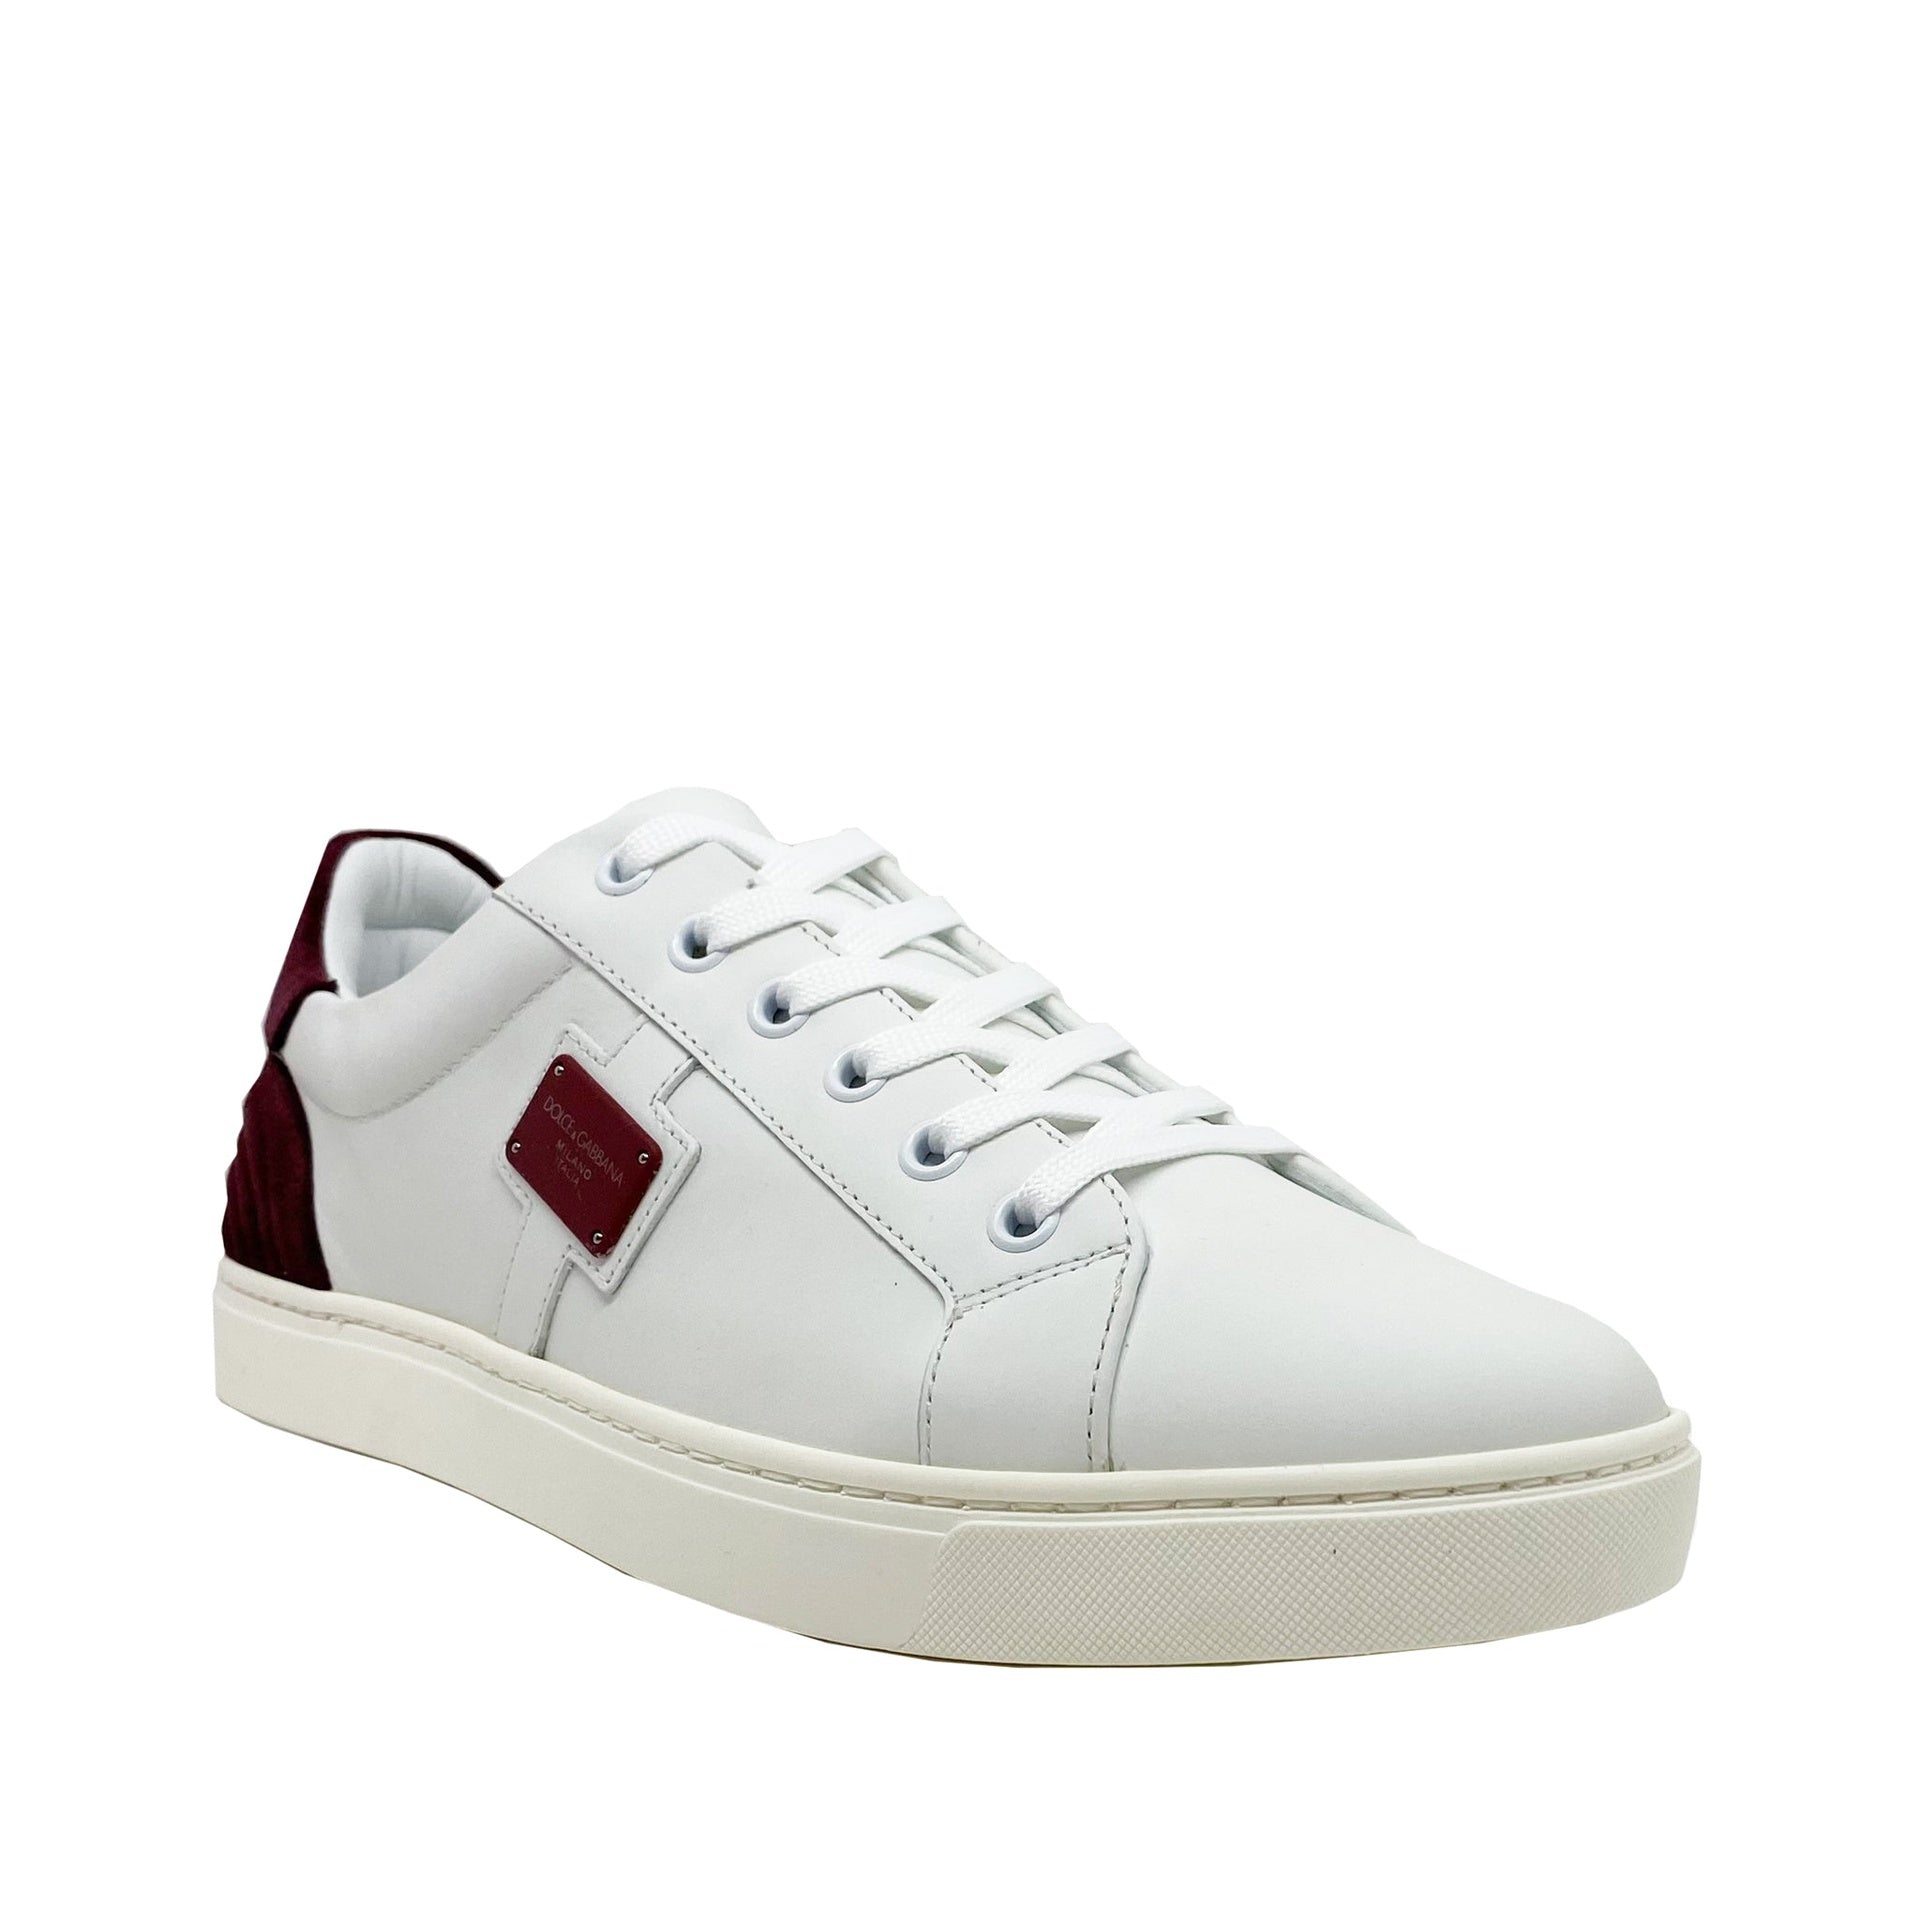 DOLCE-GABBANA-OUTLET-SALE-Dolce-Gabbana-Logo-Leather-Sneakers-Sneakers-ARCHIVE-COLLECTION-2.jpg